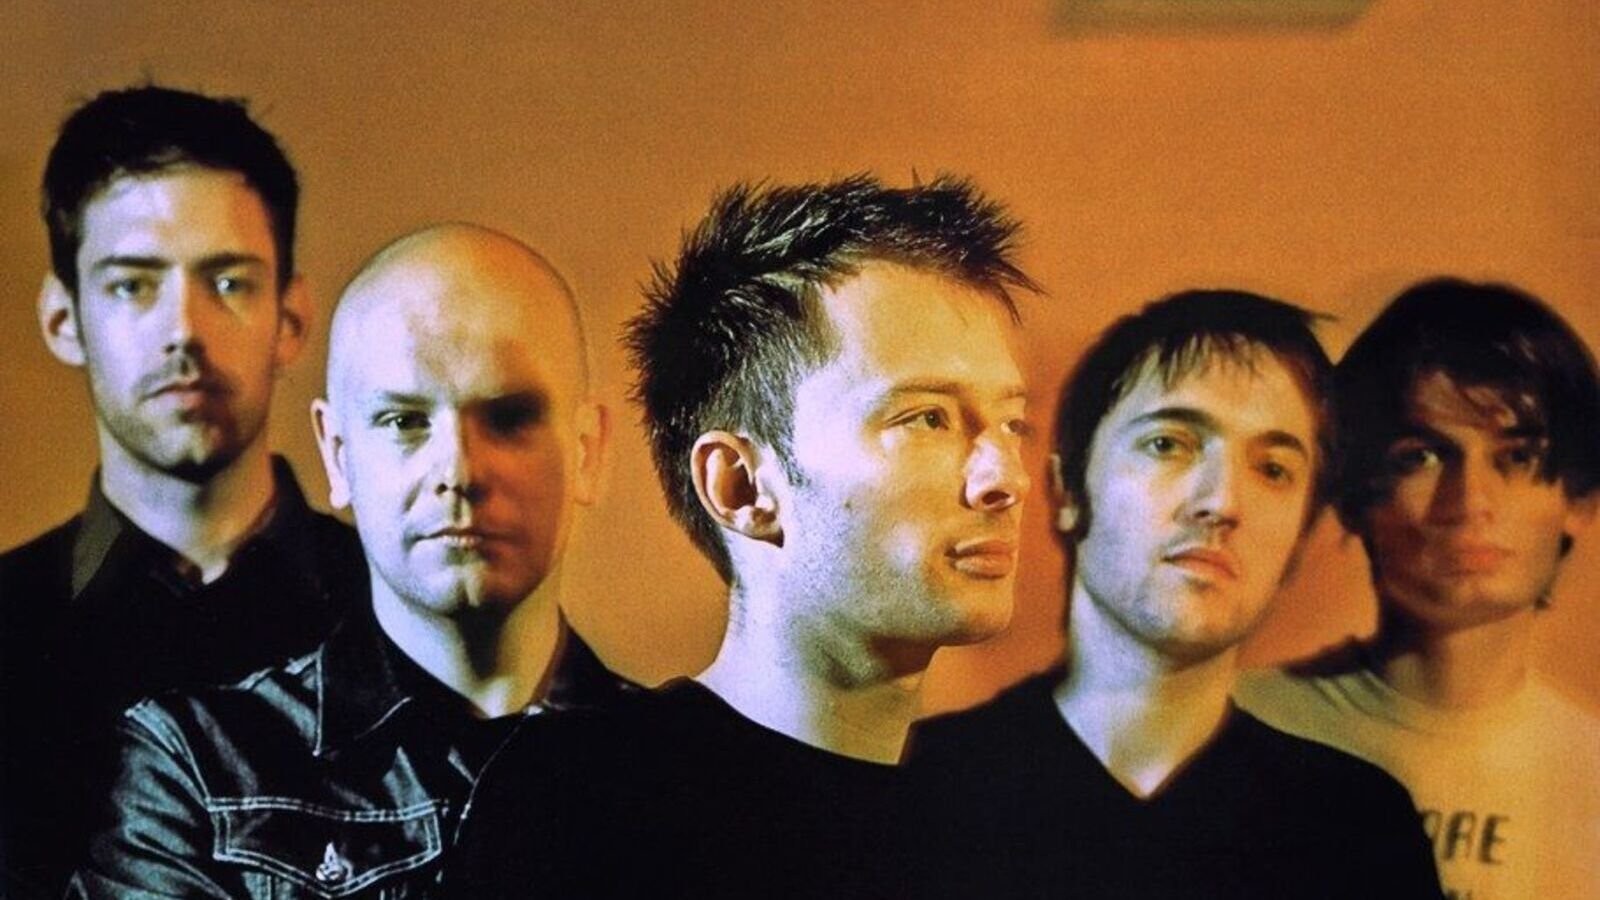 Radiohead Net Worth: Who is the richest member of Radiohead?